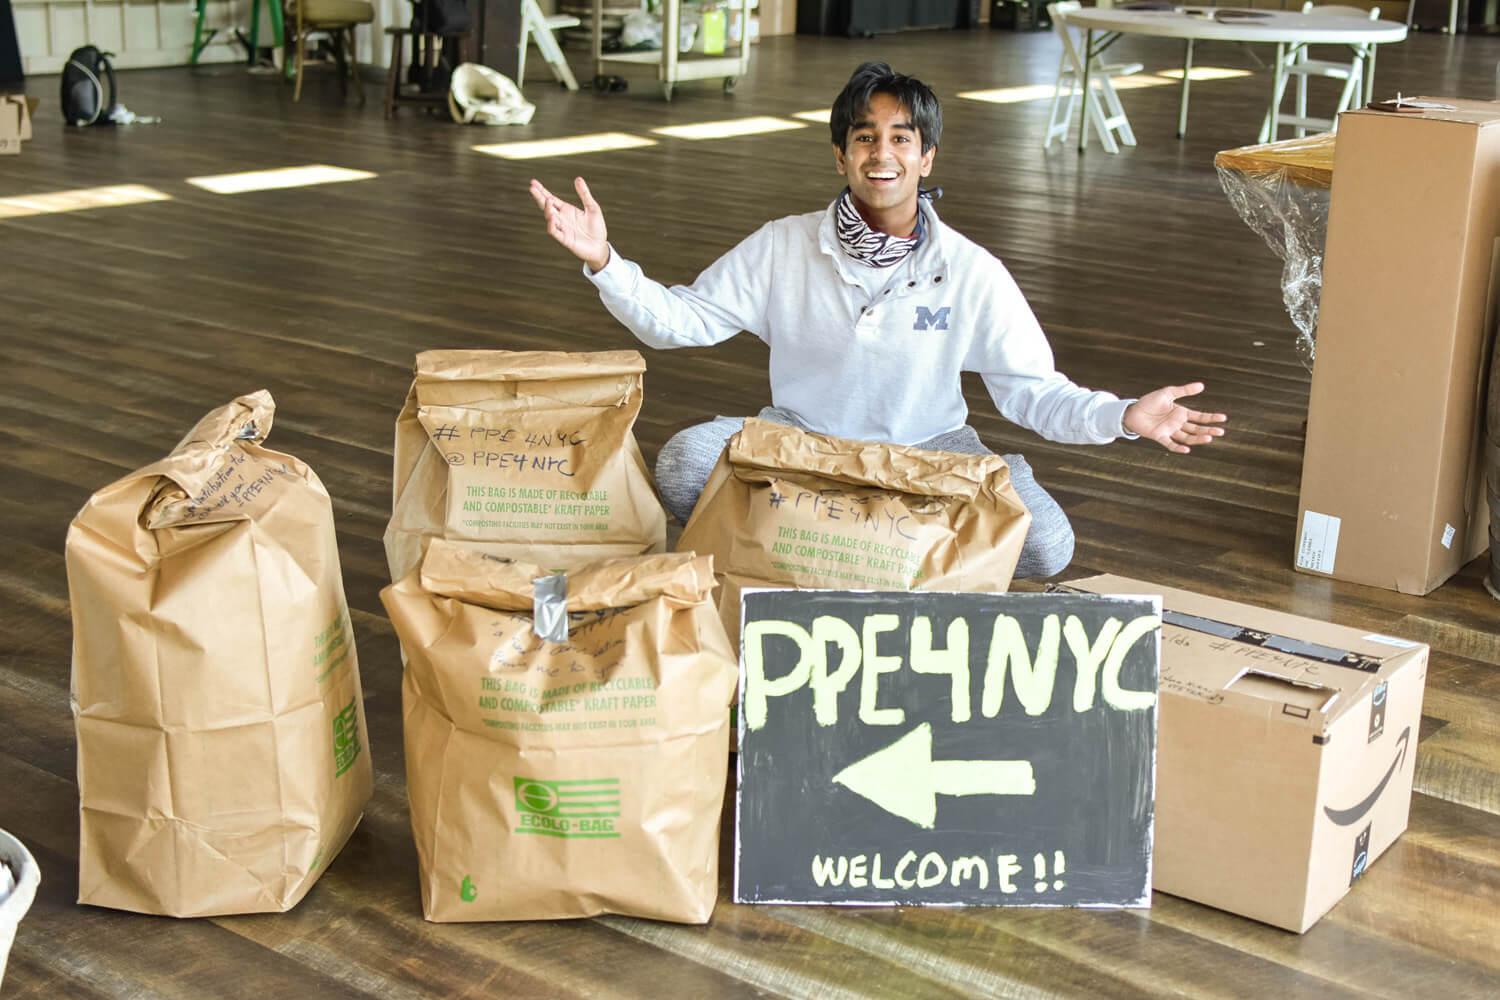 Krishna Koka, the CEO of PPE4ALL, squats by a couple of bags of PPE